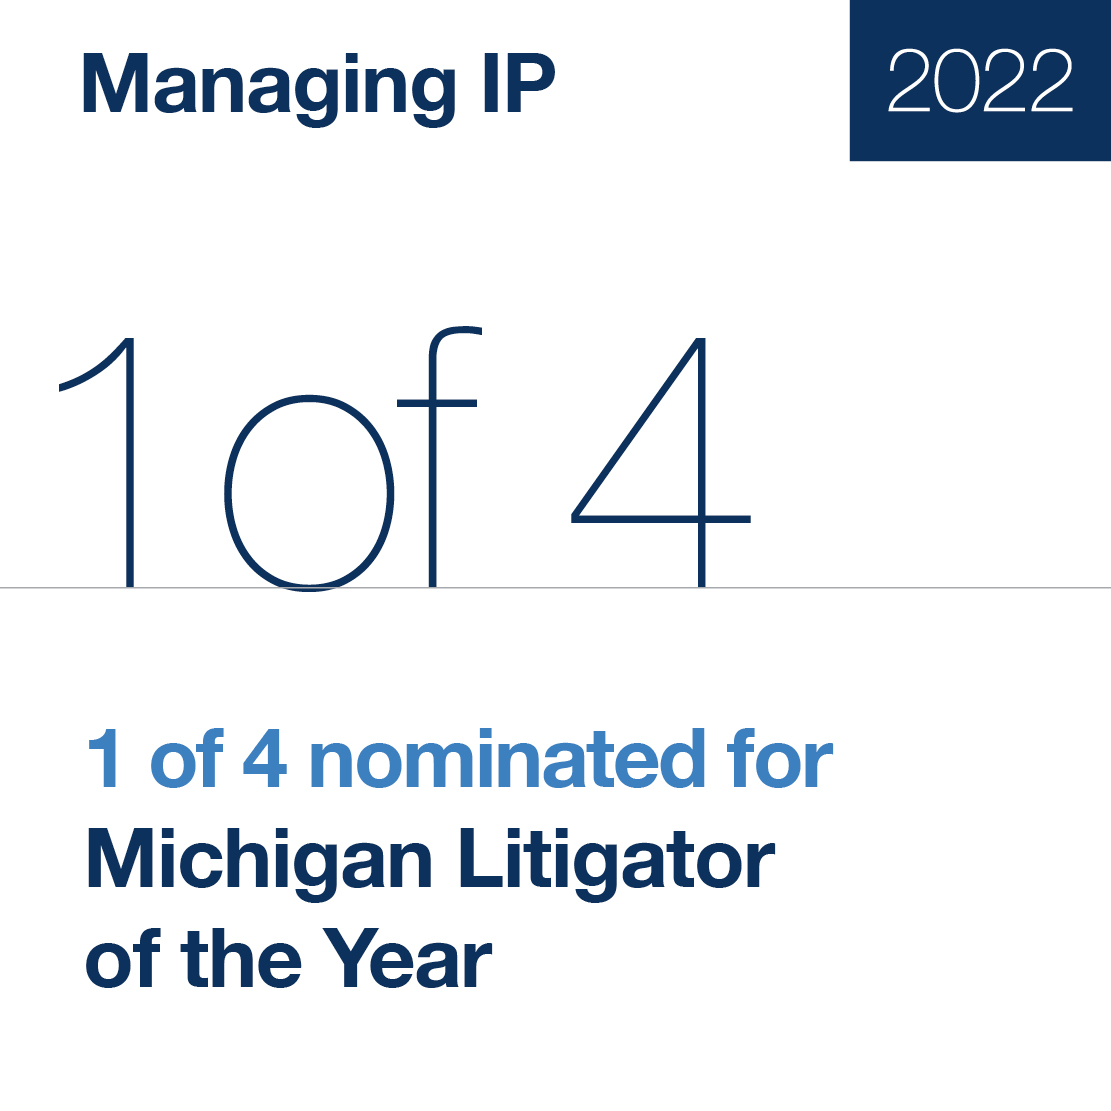 1 of 4 Nominated Litigator of the Year Michigan 2022